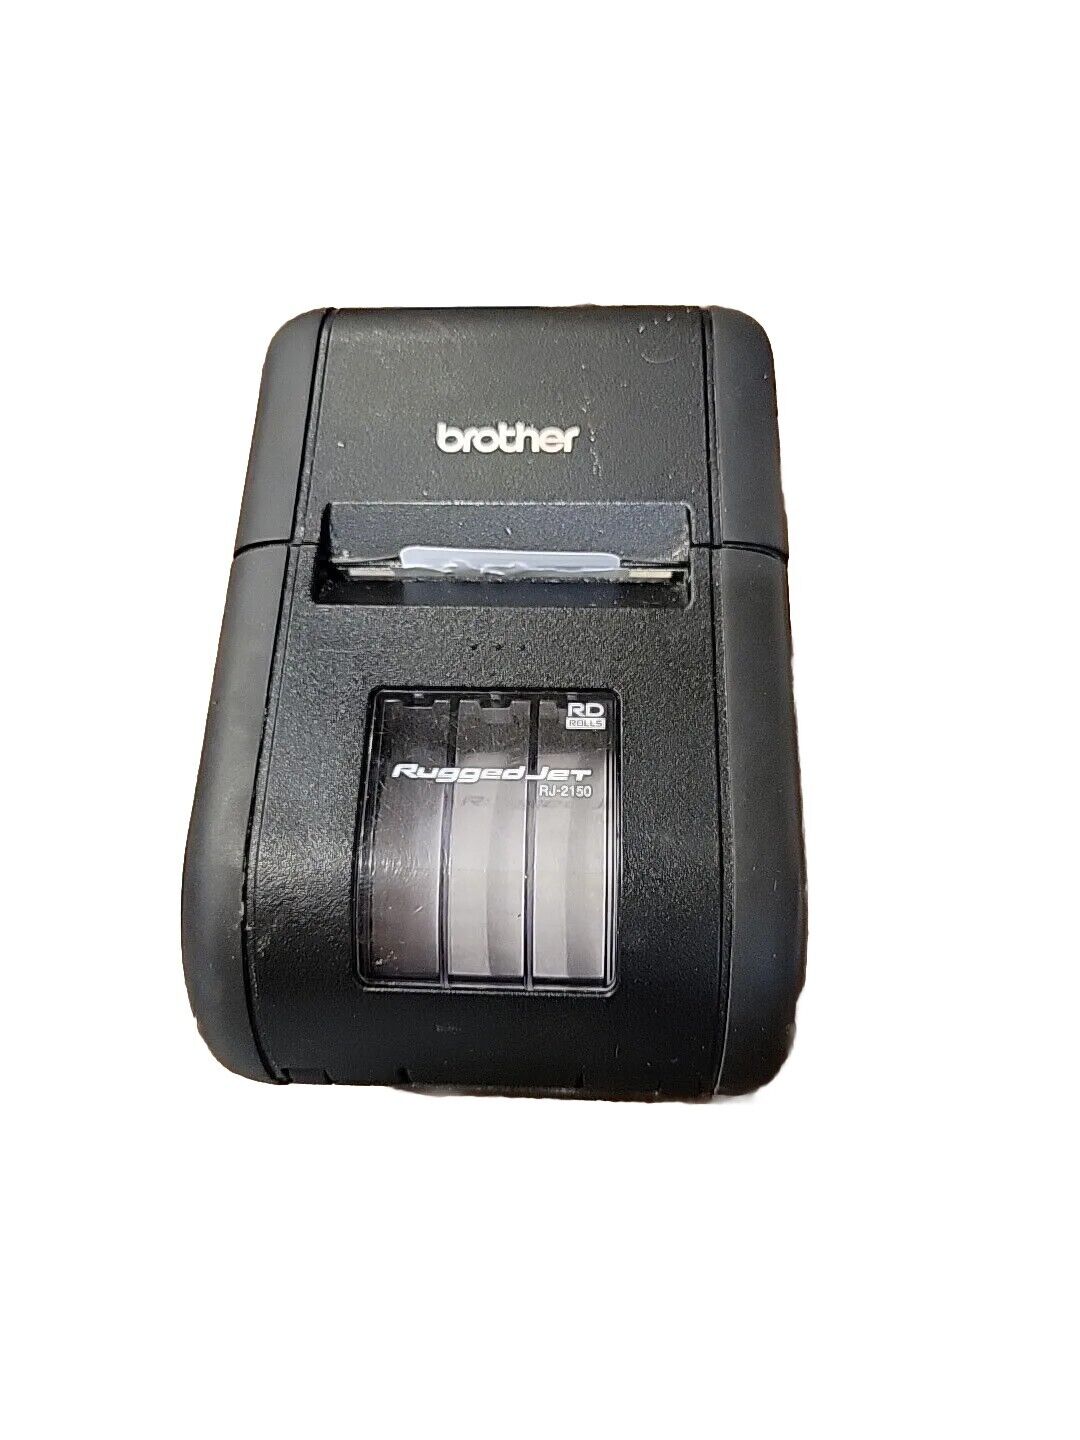 Brother RJ-2150 RuggedJet Portable Bluetooth Printer No Adapter Tested/Works